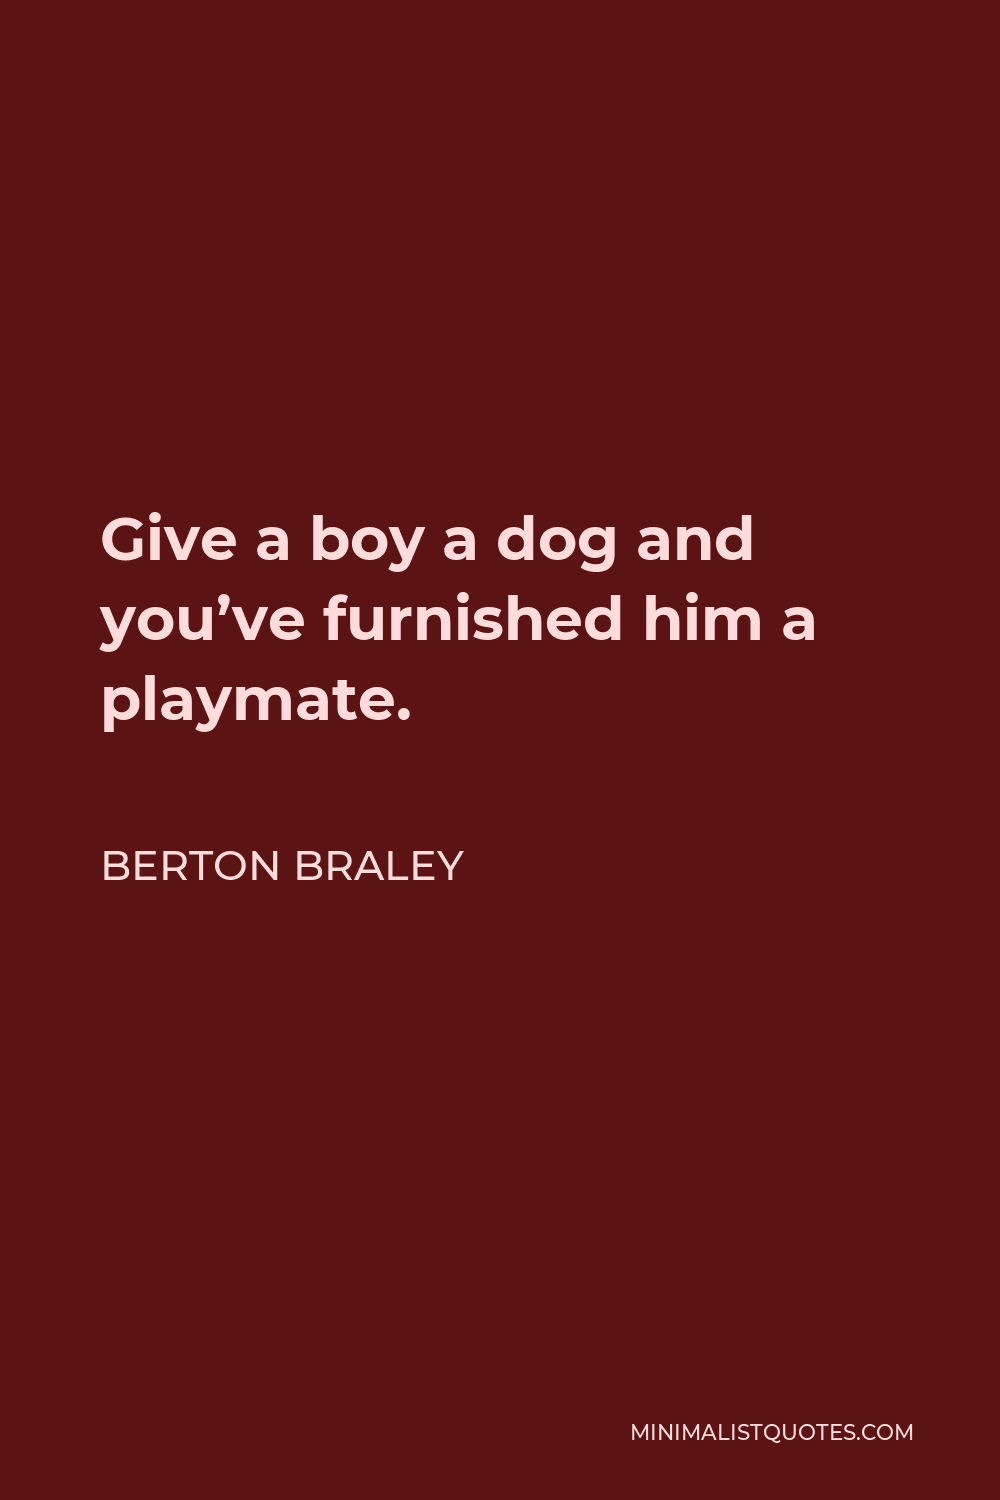 Berton Braley Quote - Give a boy a dog and you’ve furnished him a playmate.